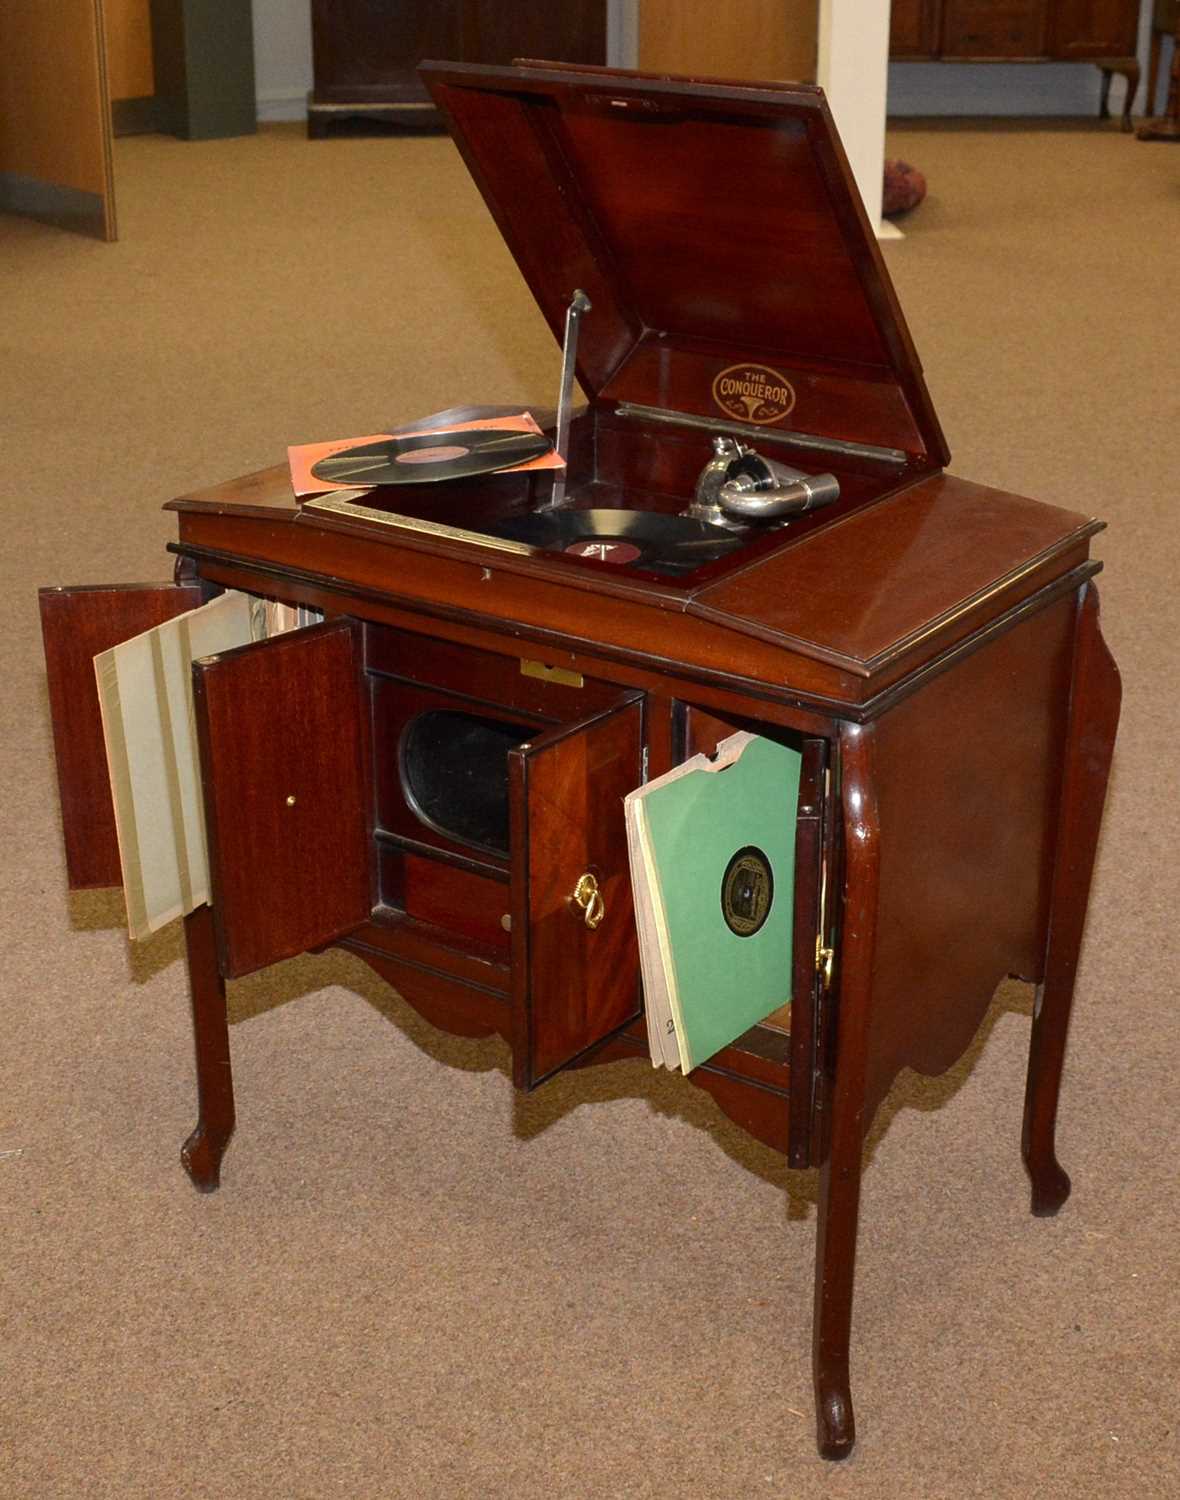 ‘The ‘Conqueror’ gramophone player; and a selection of 78rpm records. - Image 5 of 5